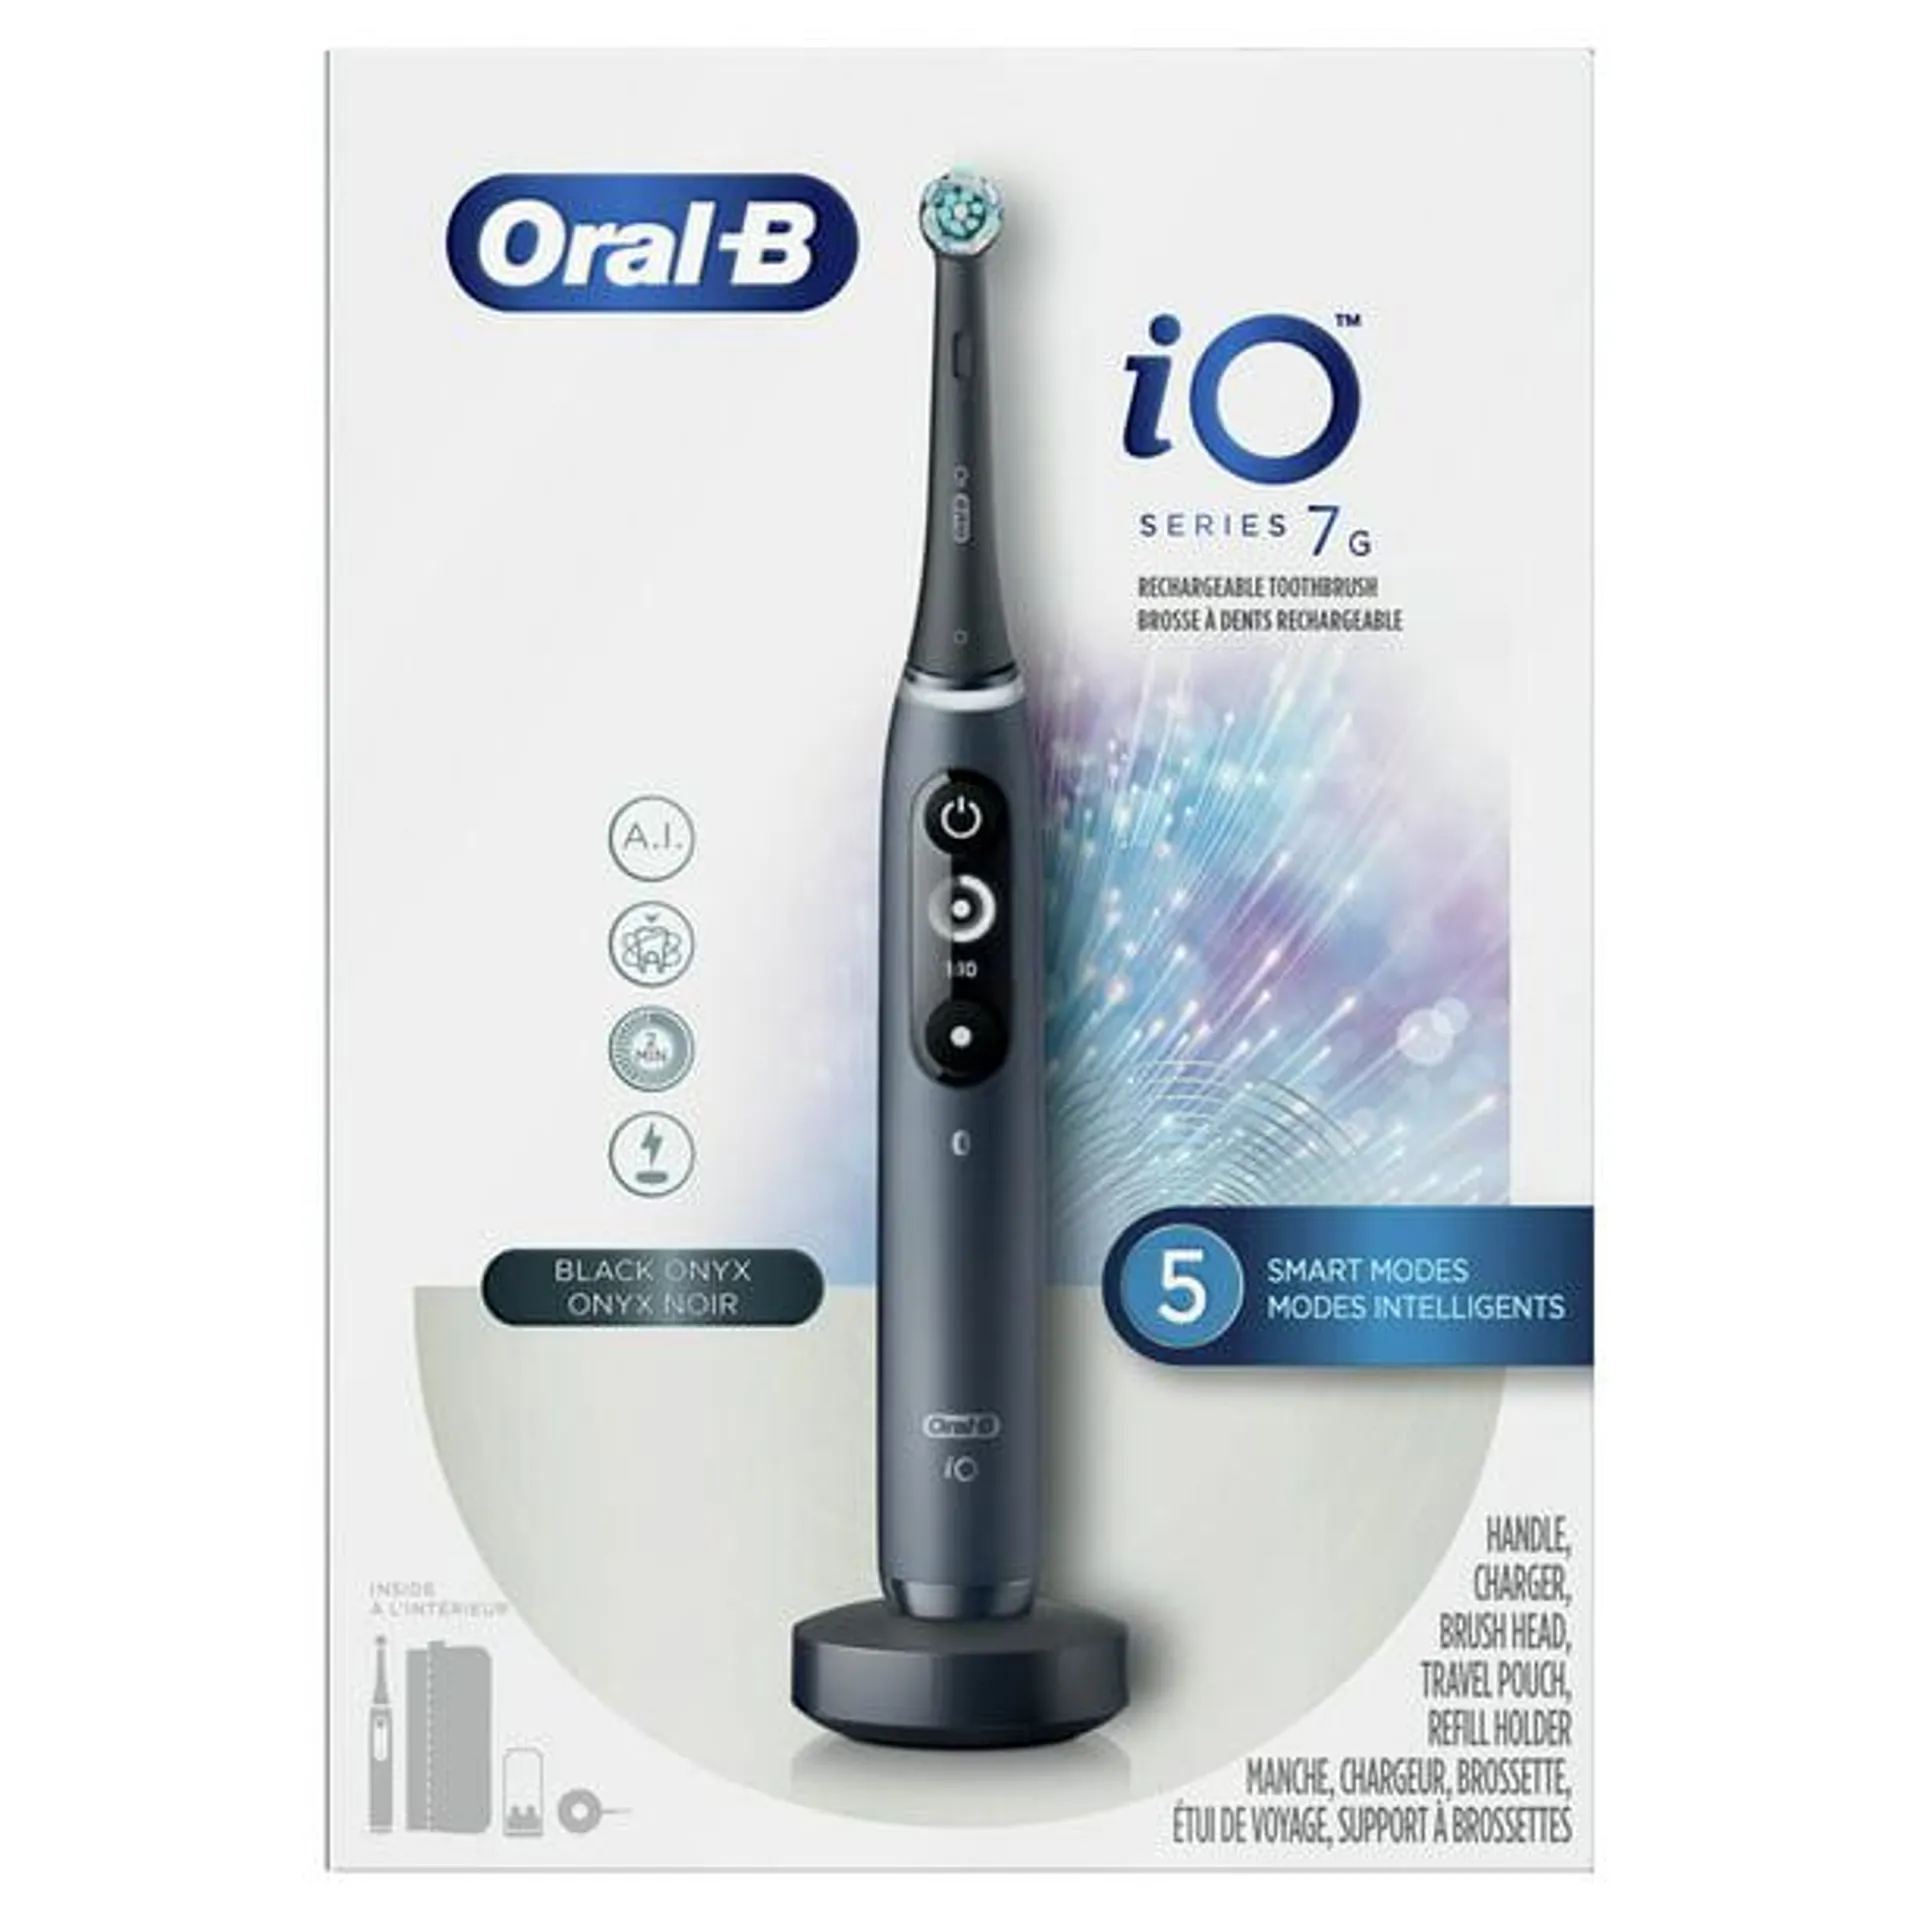 Oral-B iO Series 7G Rechargeable Electric Toothbrush, Black, 1 Ct